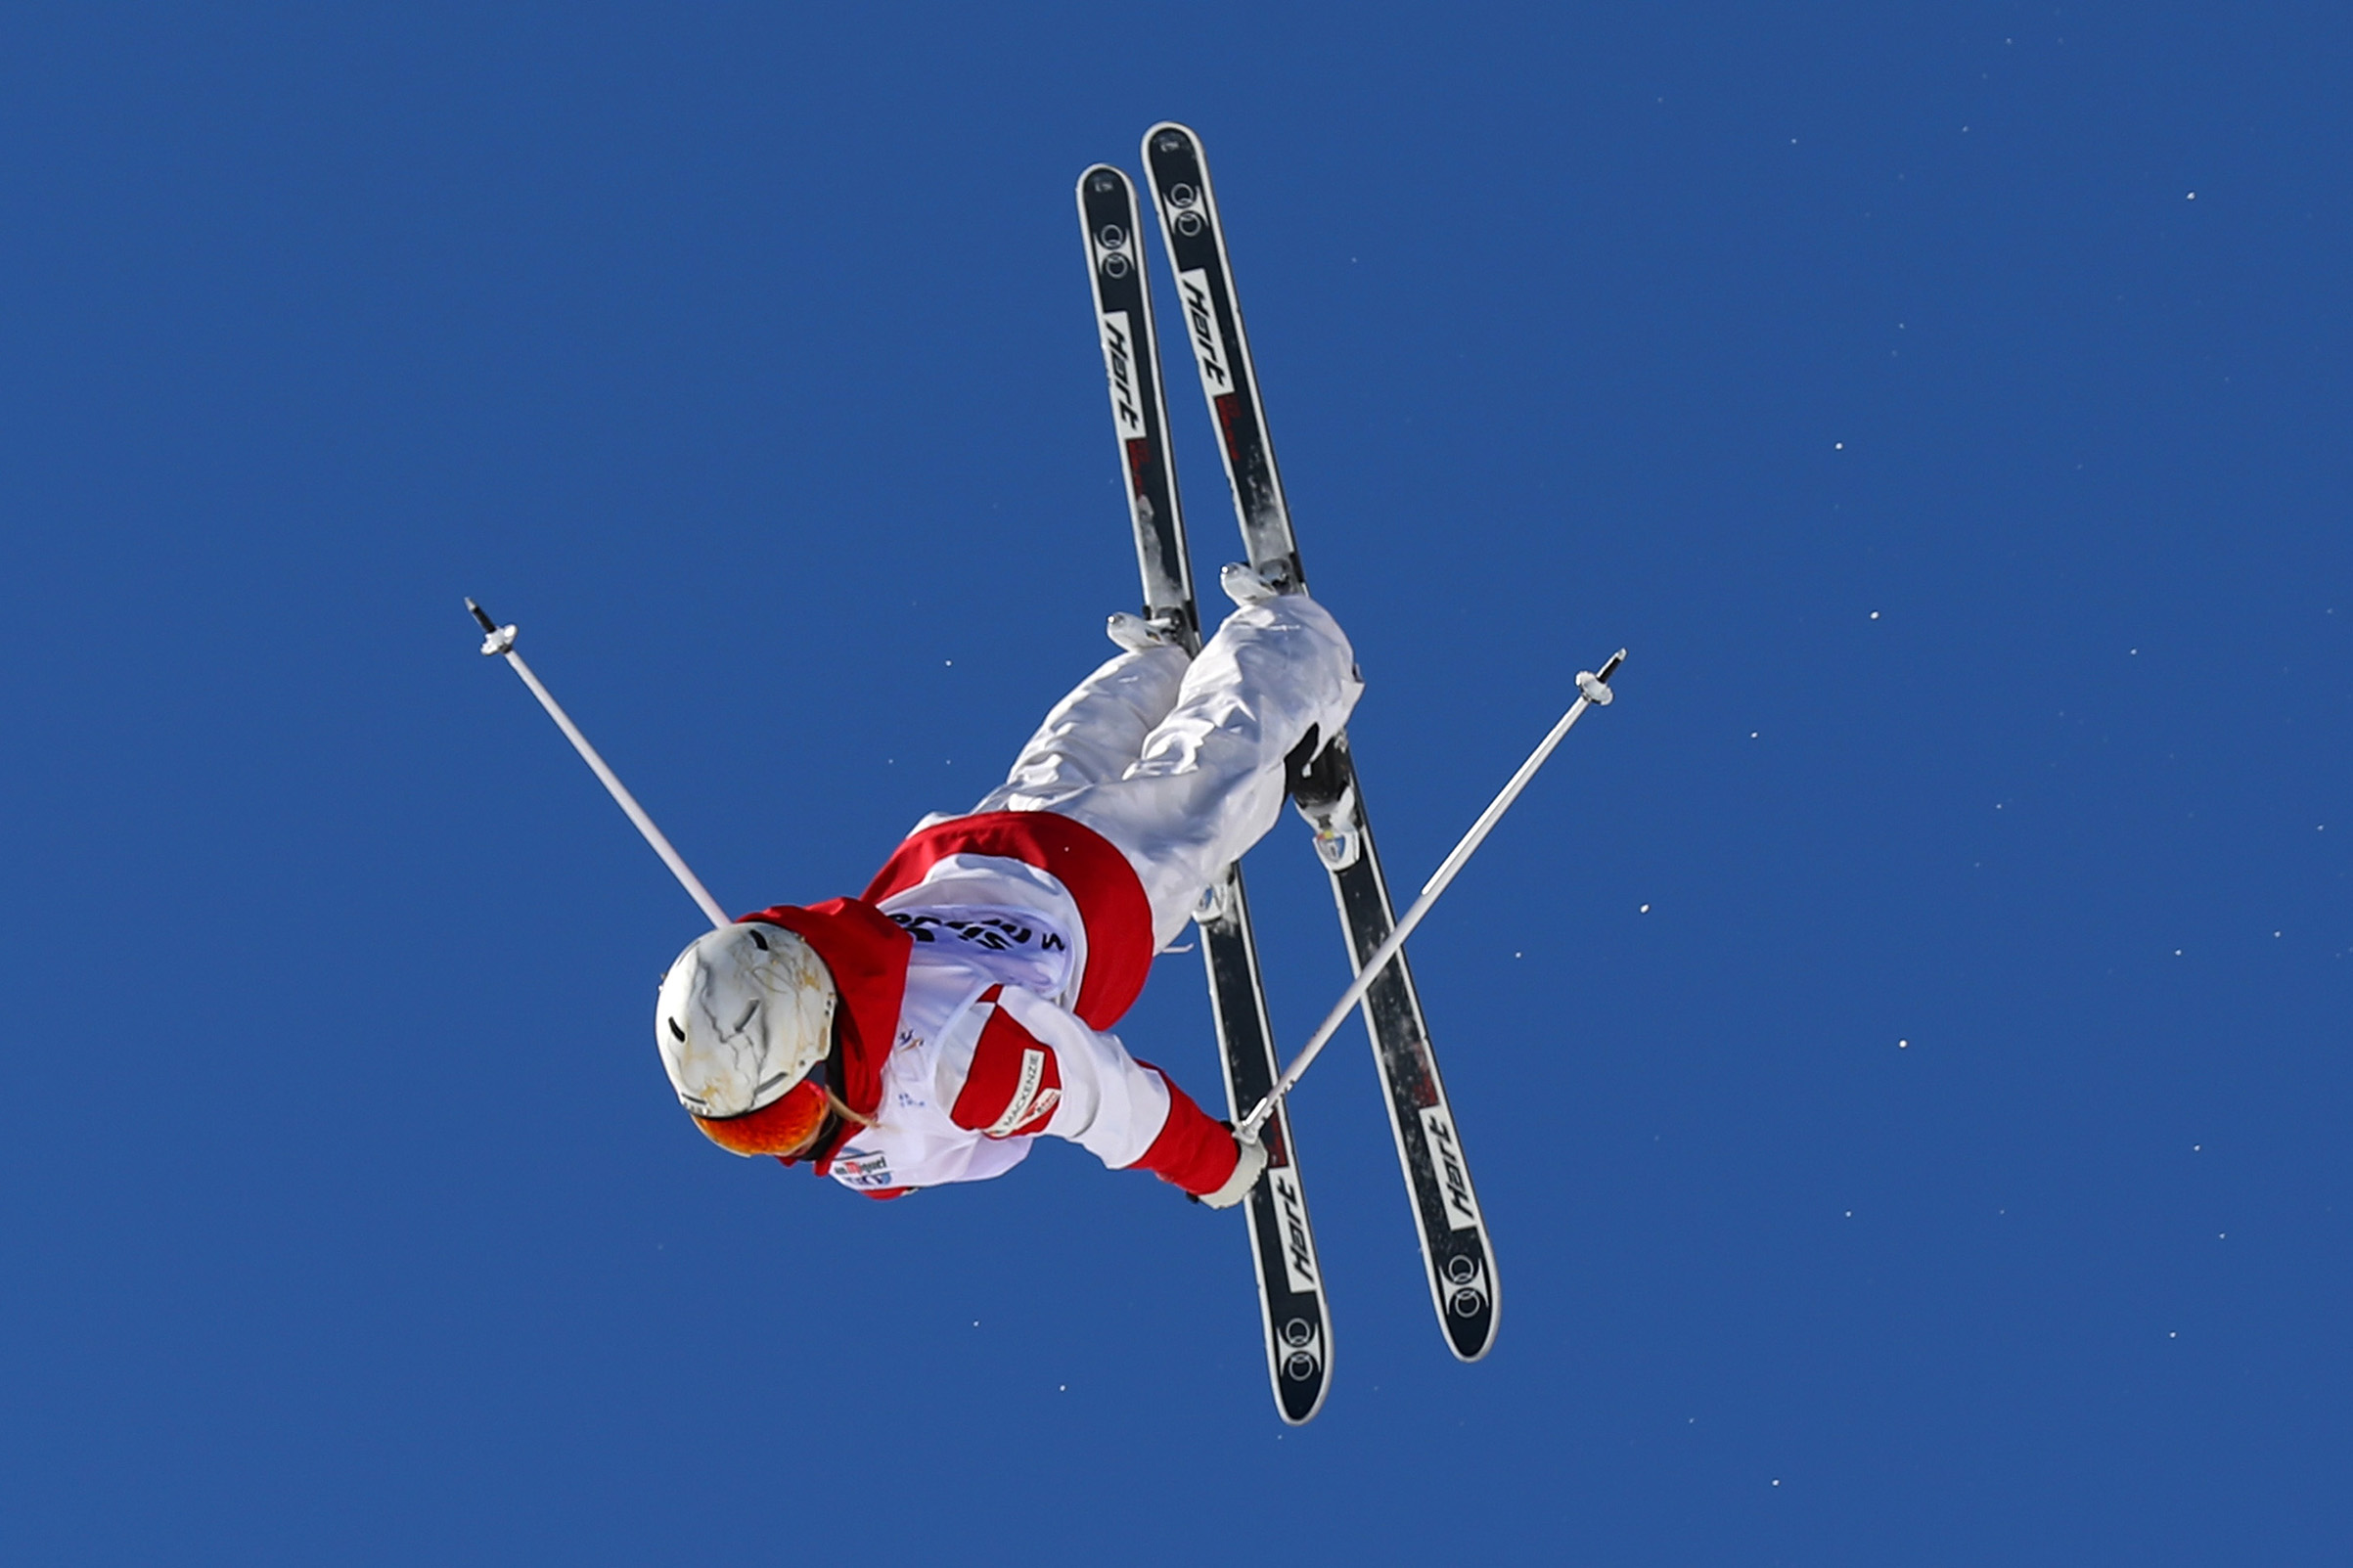 Olympic athlete Justine Dufour-Lapointe of Canada competes in the Women's Moguls qualification at the FIS Freestyle Ski & Snowboard World Championships in Sierra Nevada, Spain, on March 8, 2017. Clive Rose—Getty Images (Clive Rose—Getty Images)